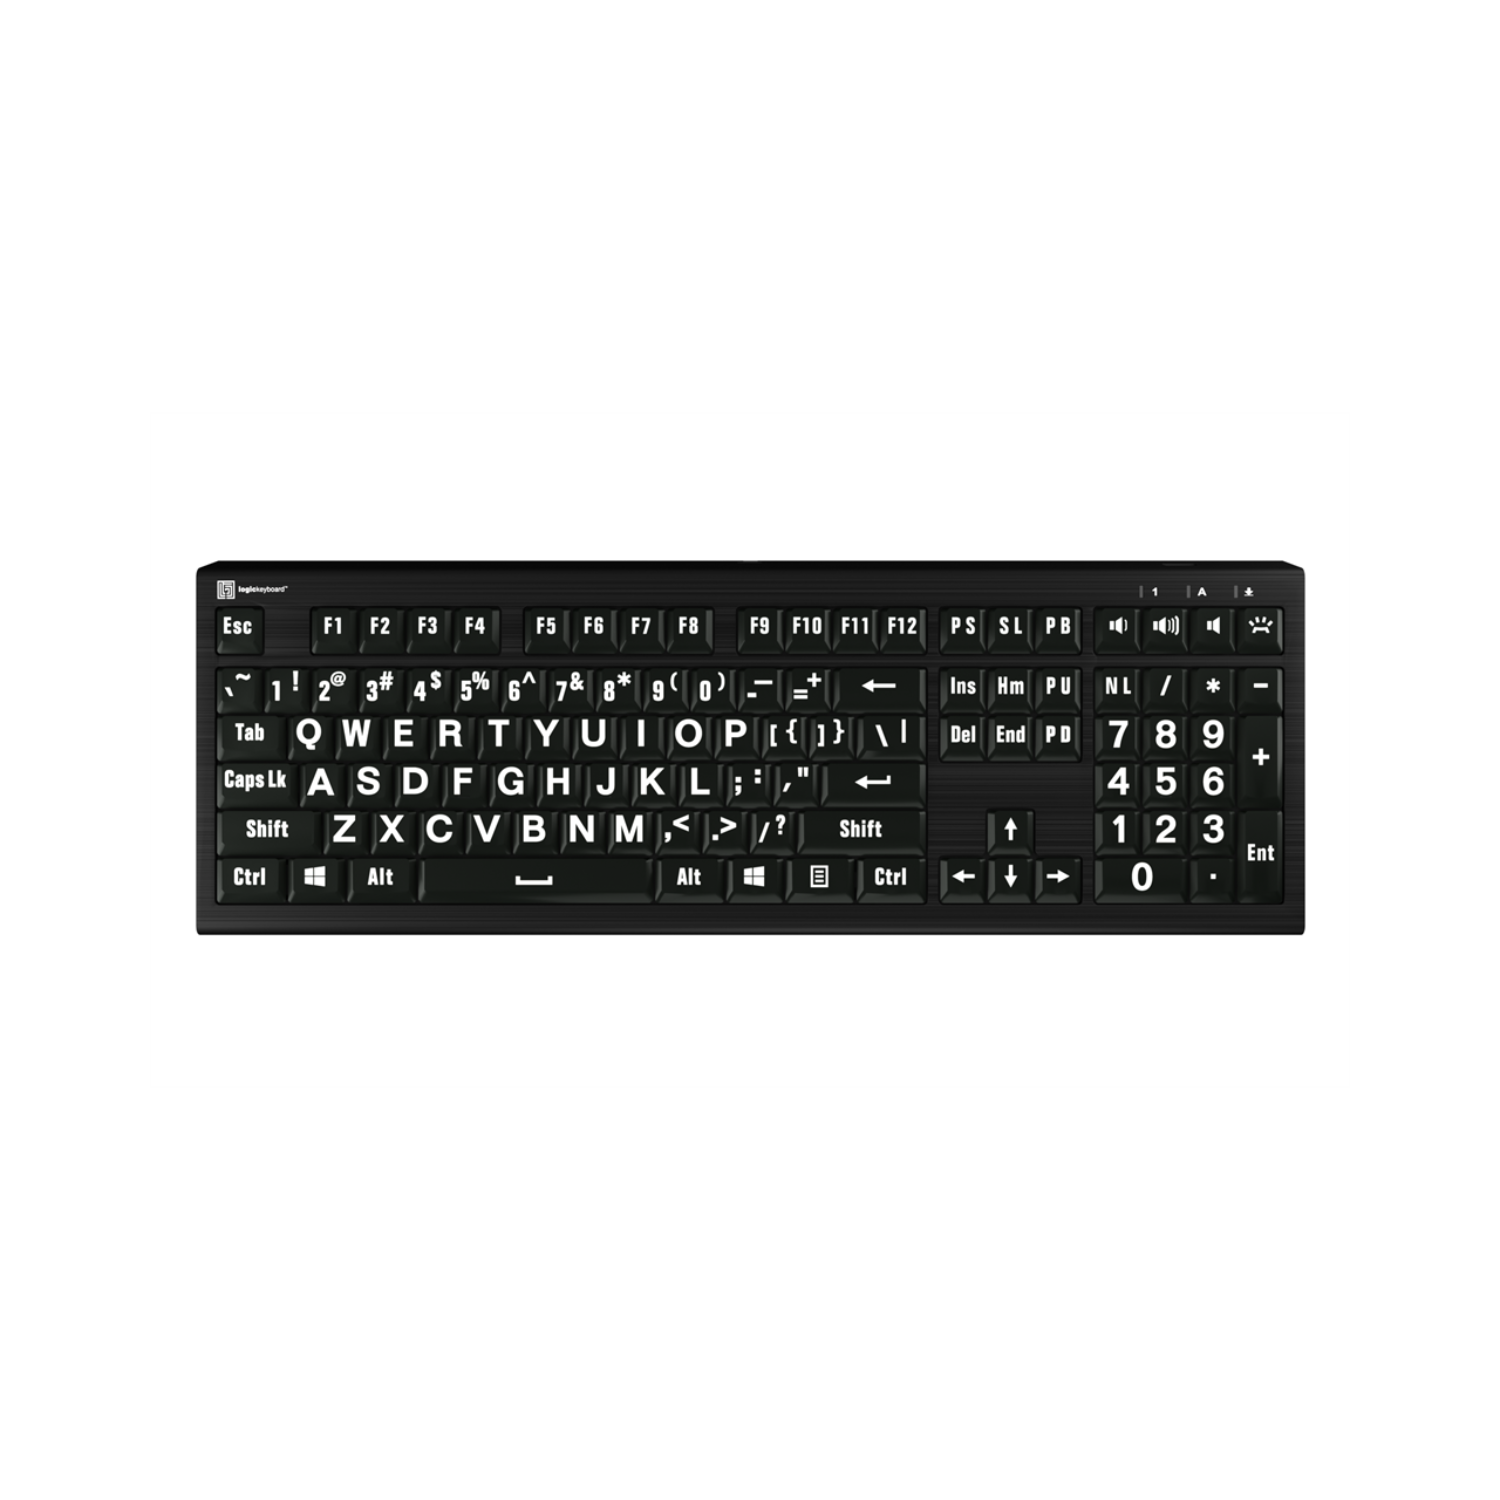 Large Print Braille Keyboard Labels ( White Letters on Black )